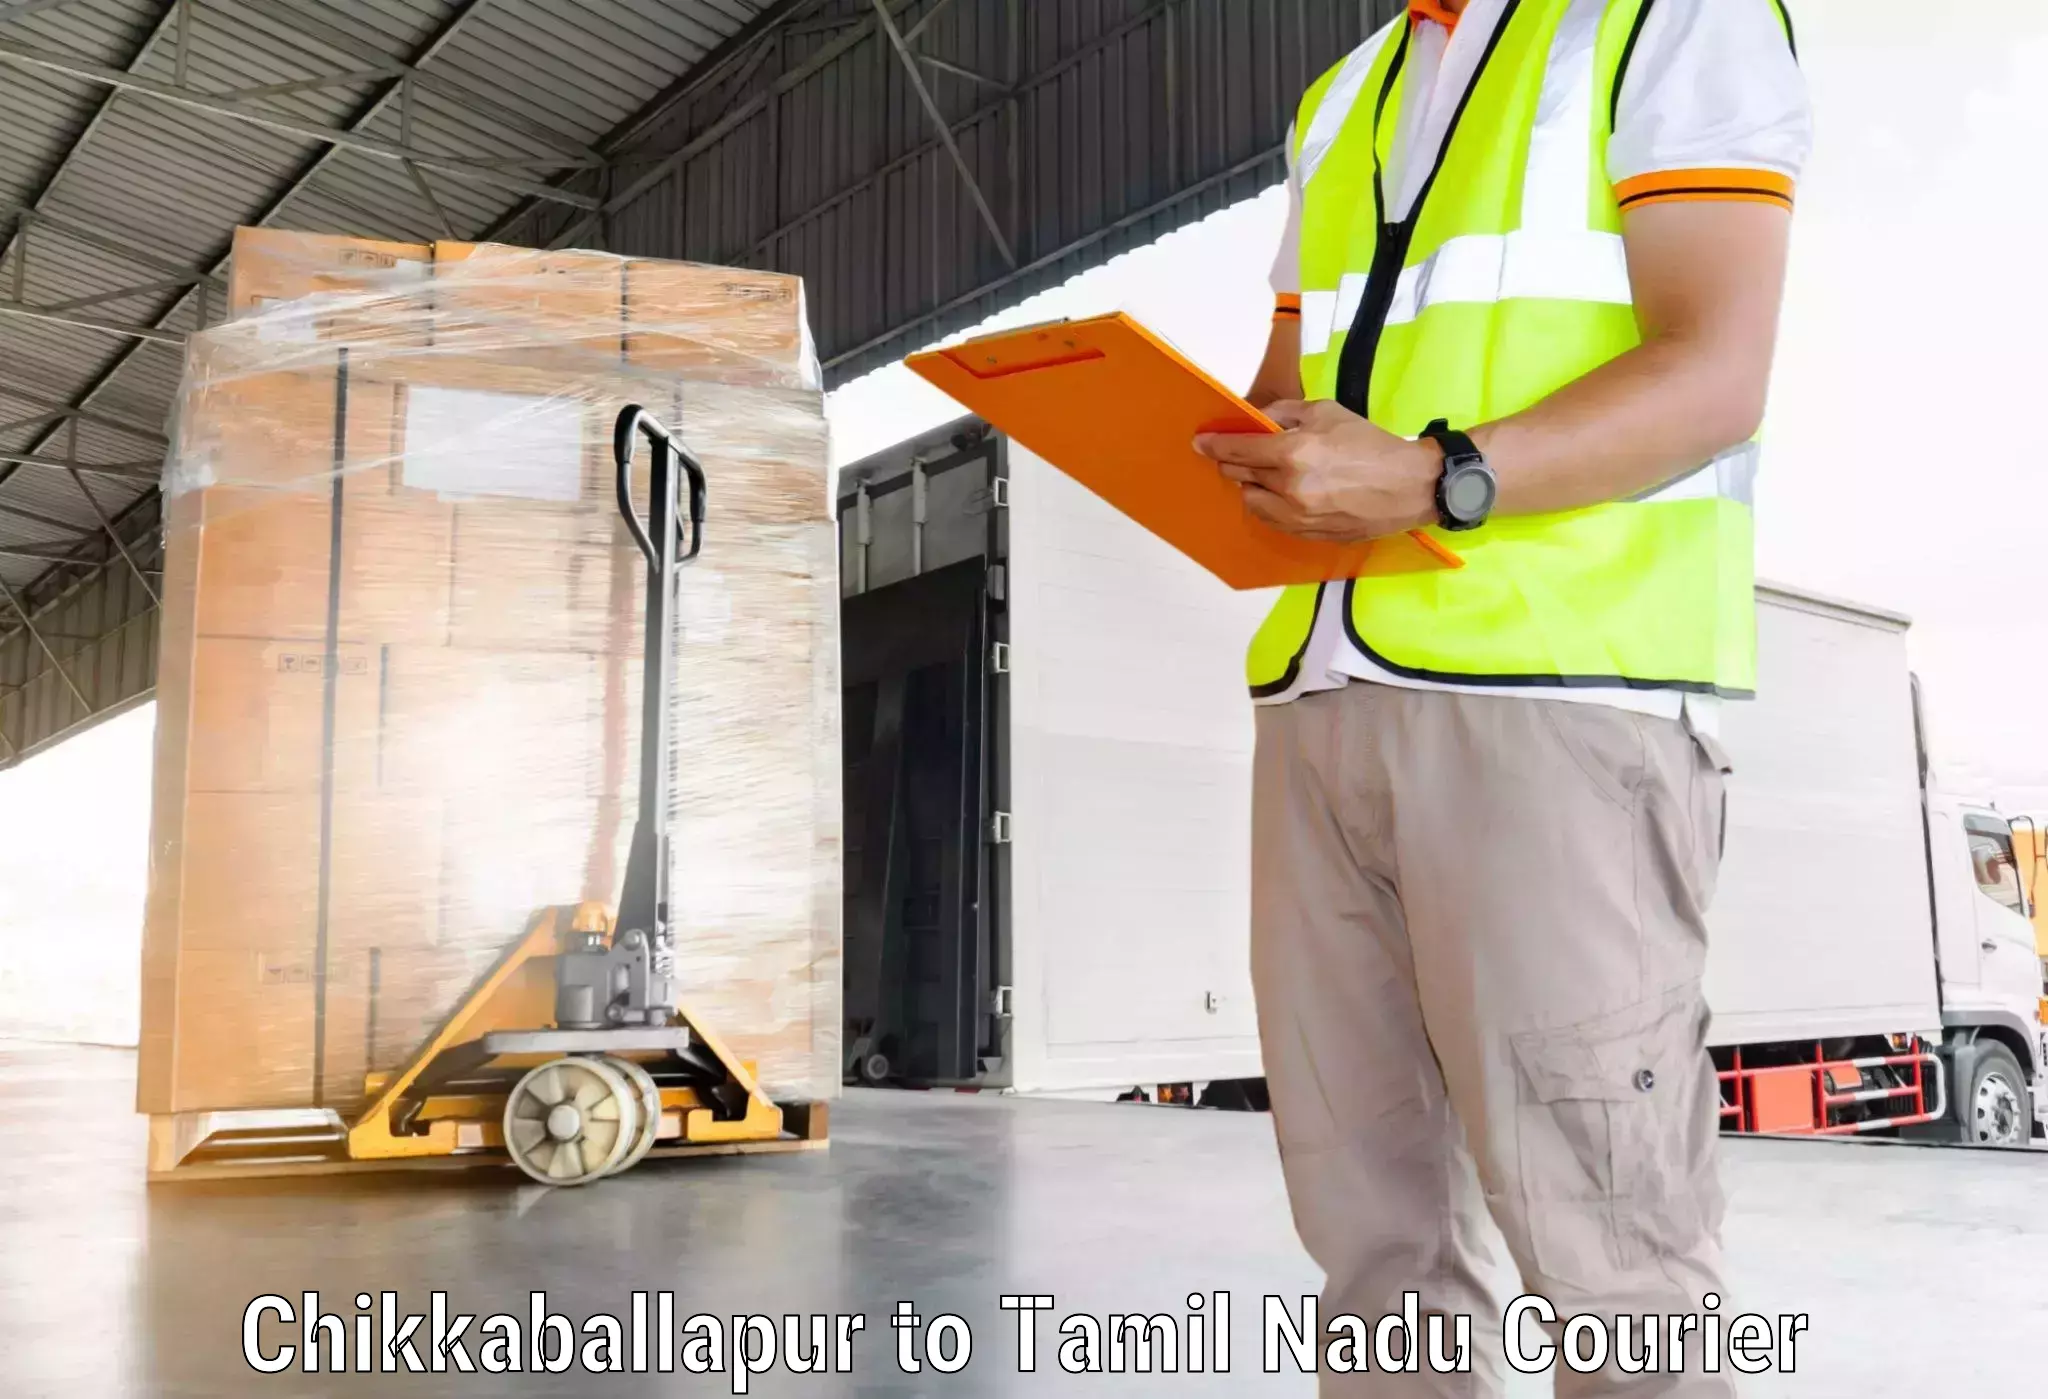 Express package services Chikkaballapur to Ennore Port Chennai